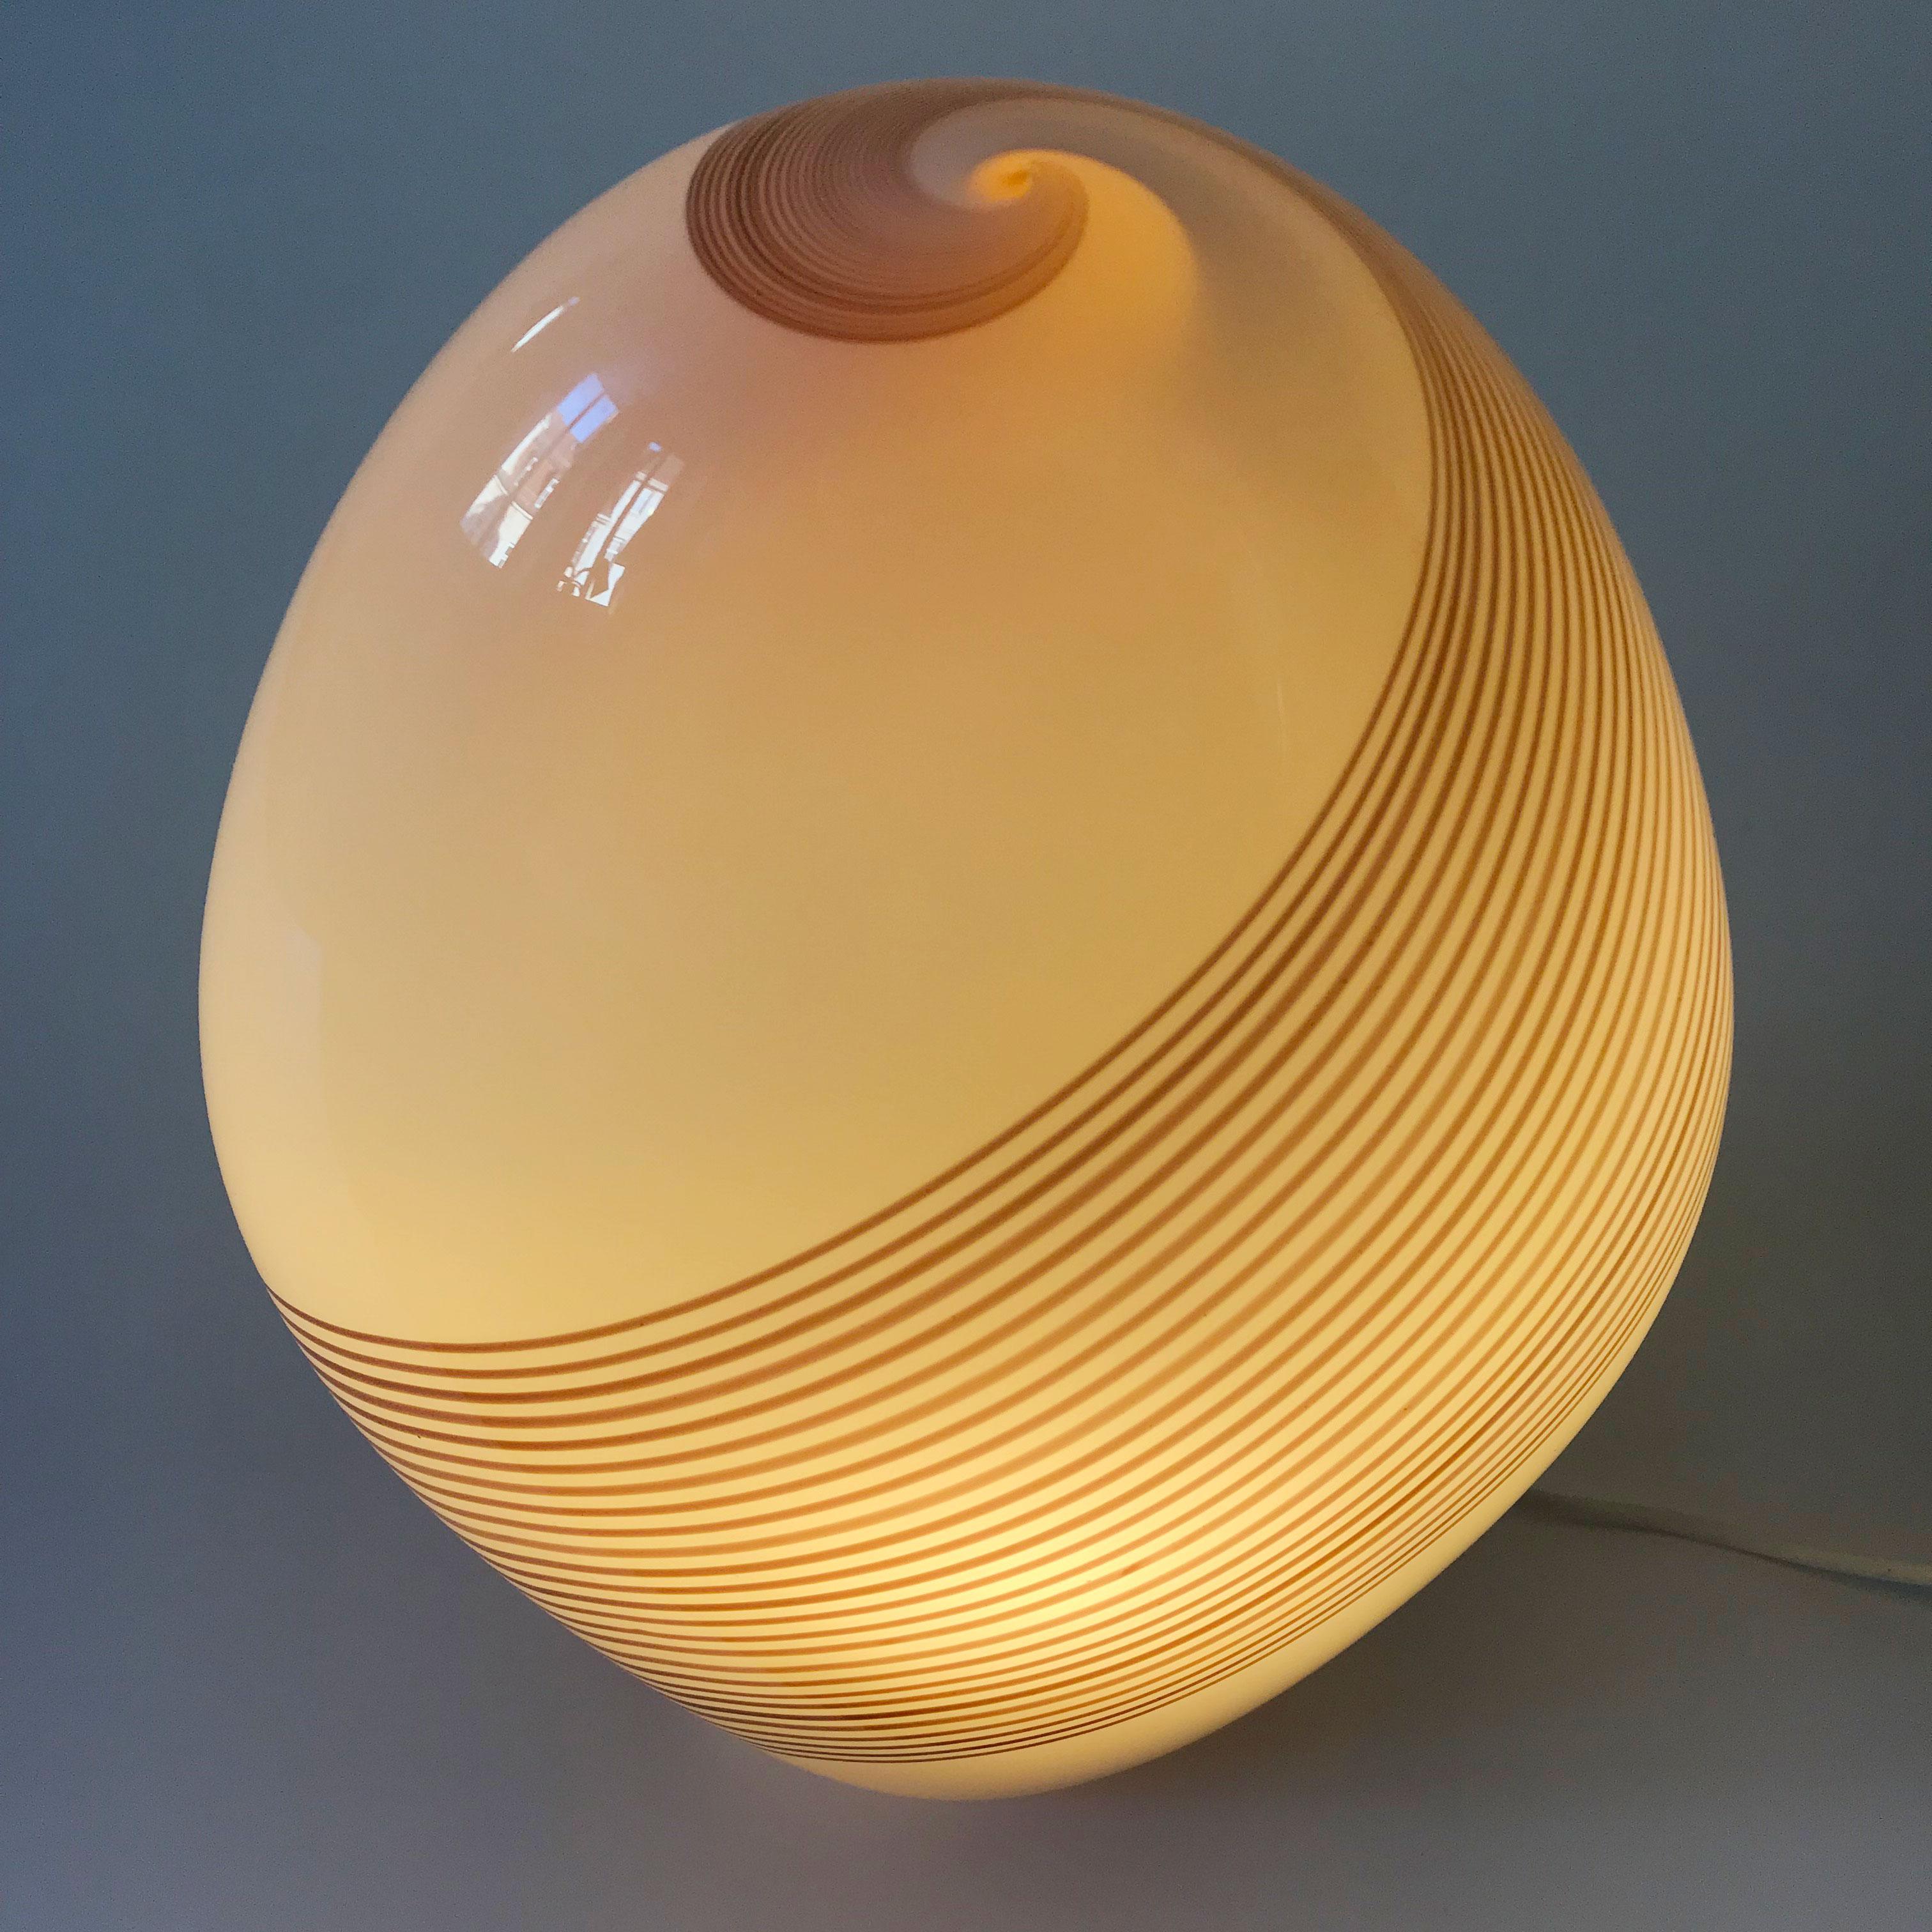 Mid-Century Modern Exceptional Murano Glass Table Lamp by Lino Tagliapietra for Effetre 1980s Italy For Sale